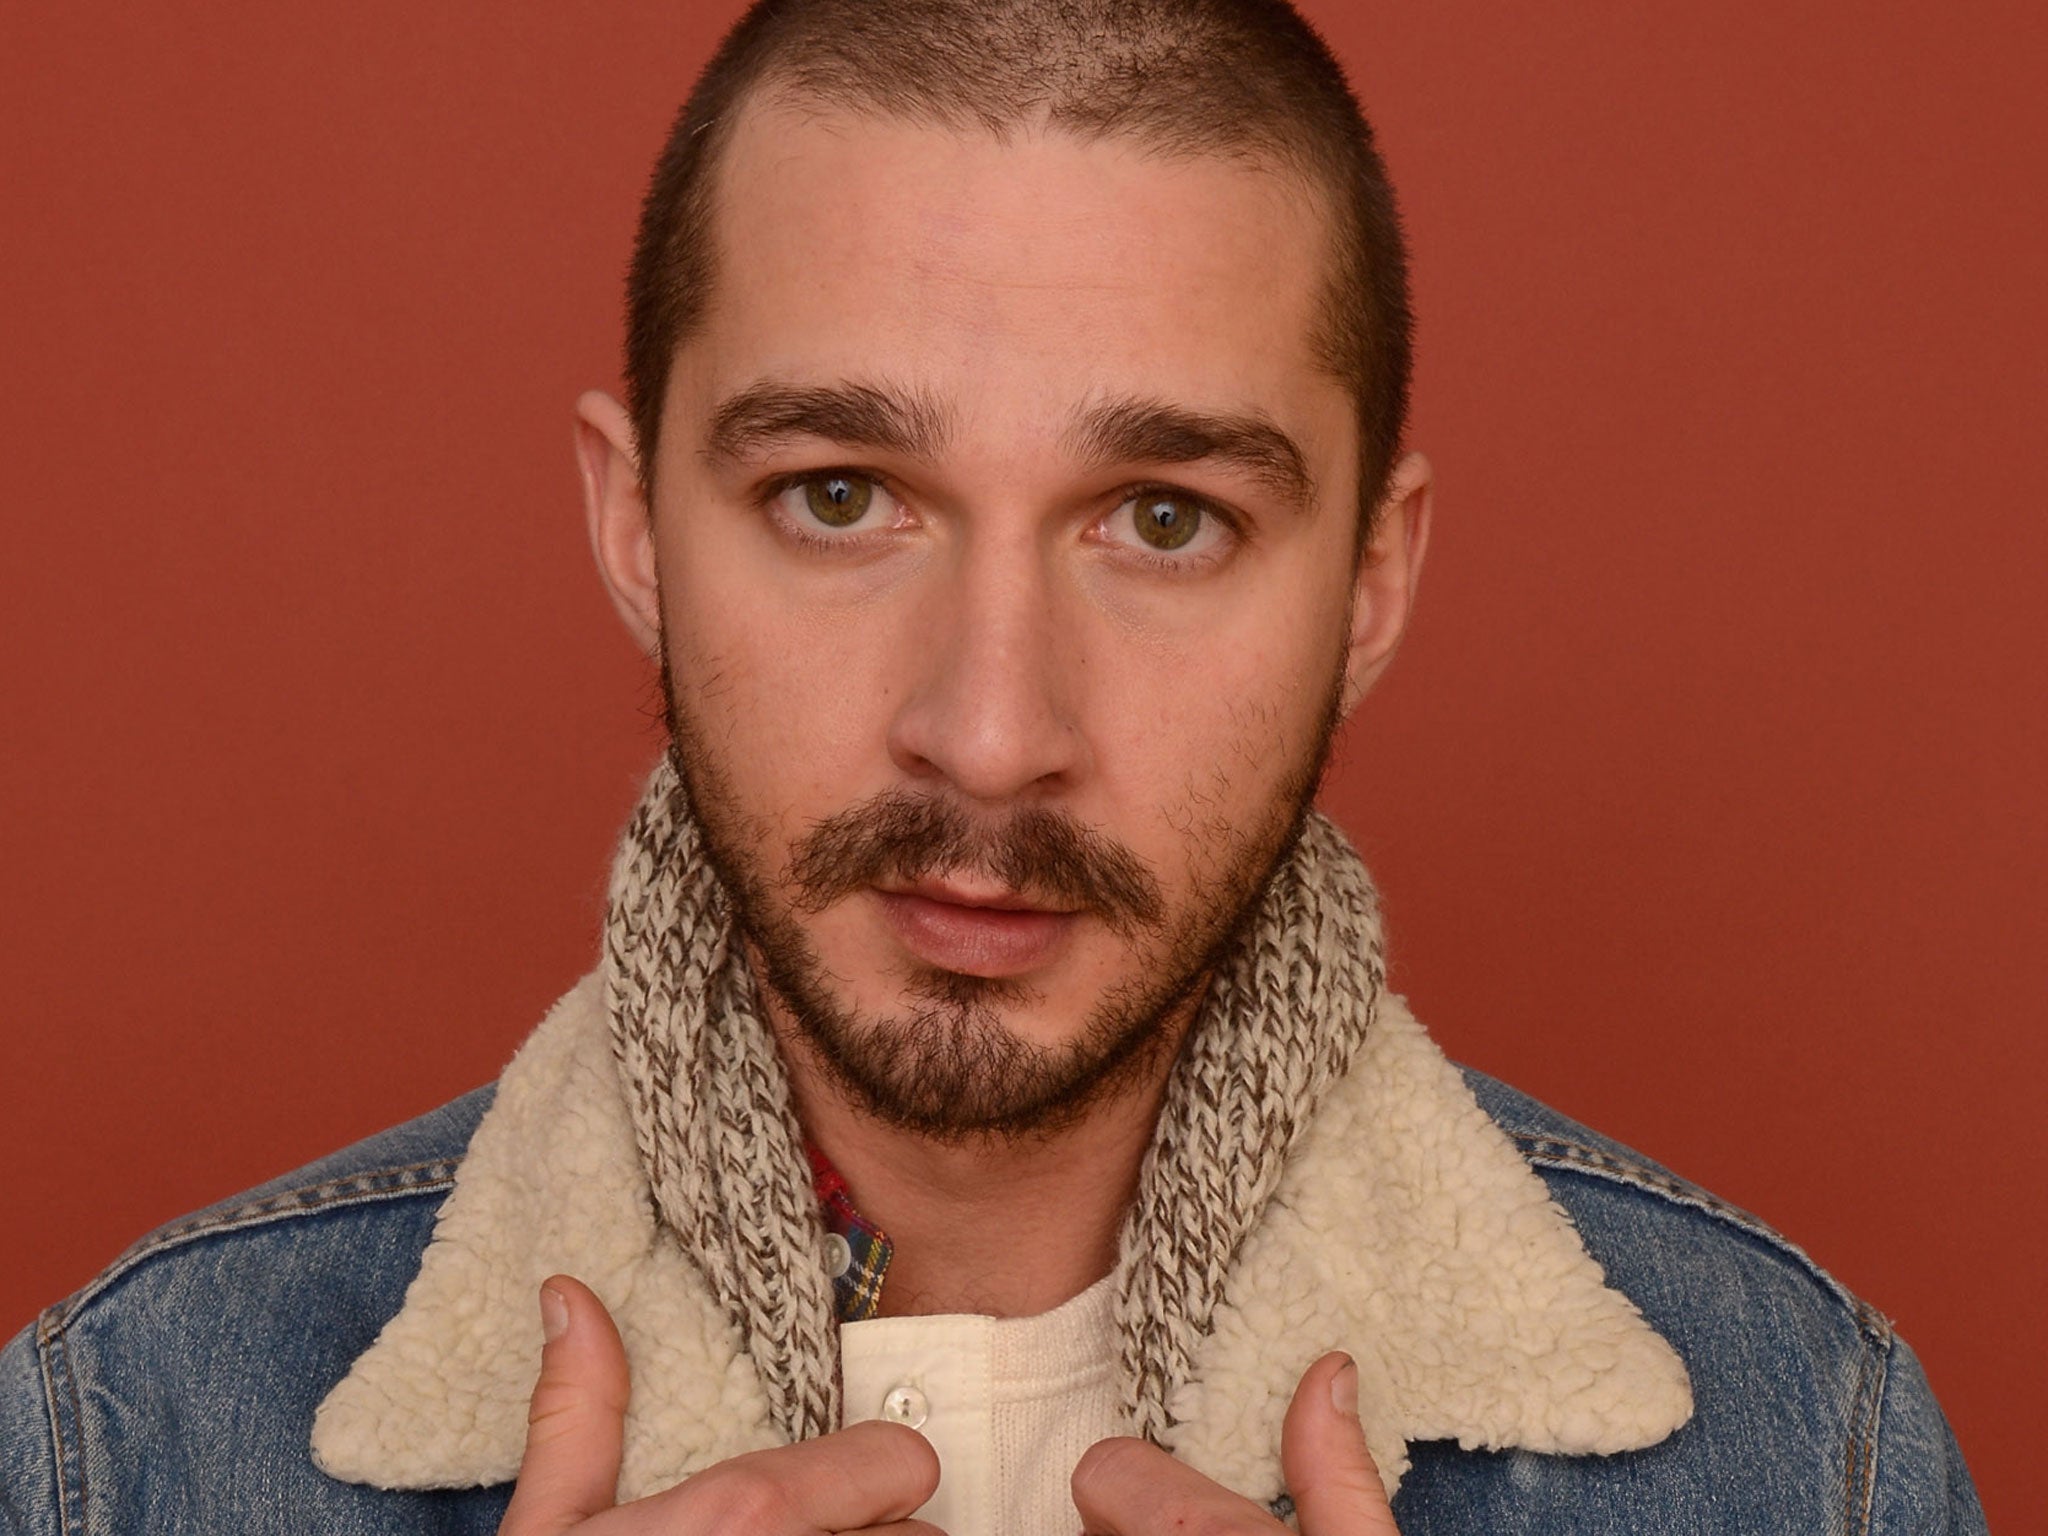 Shia LaBeouf has built a reputation for launching baffling performance art projects that involve the public